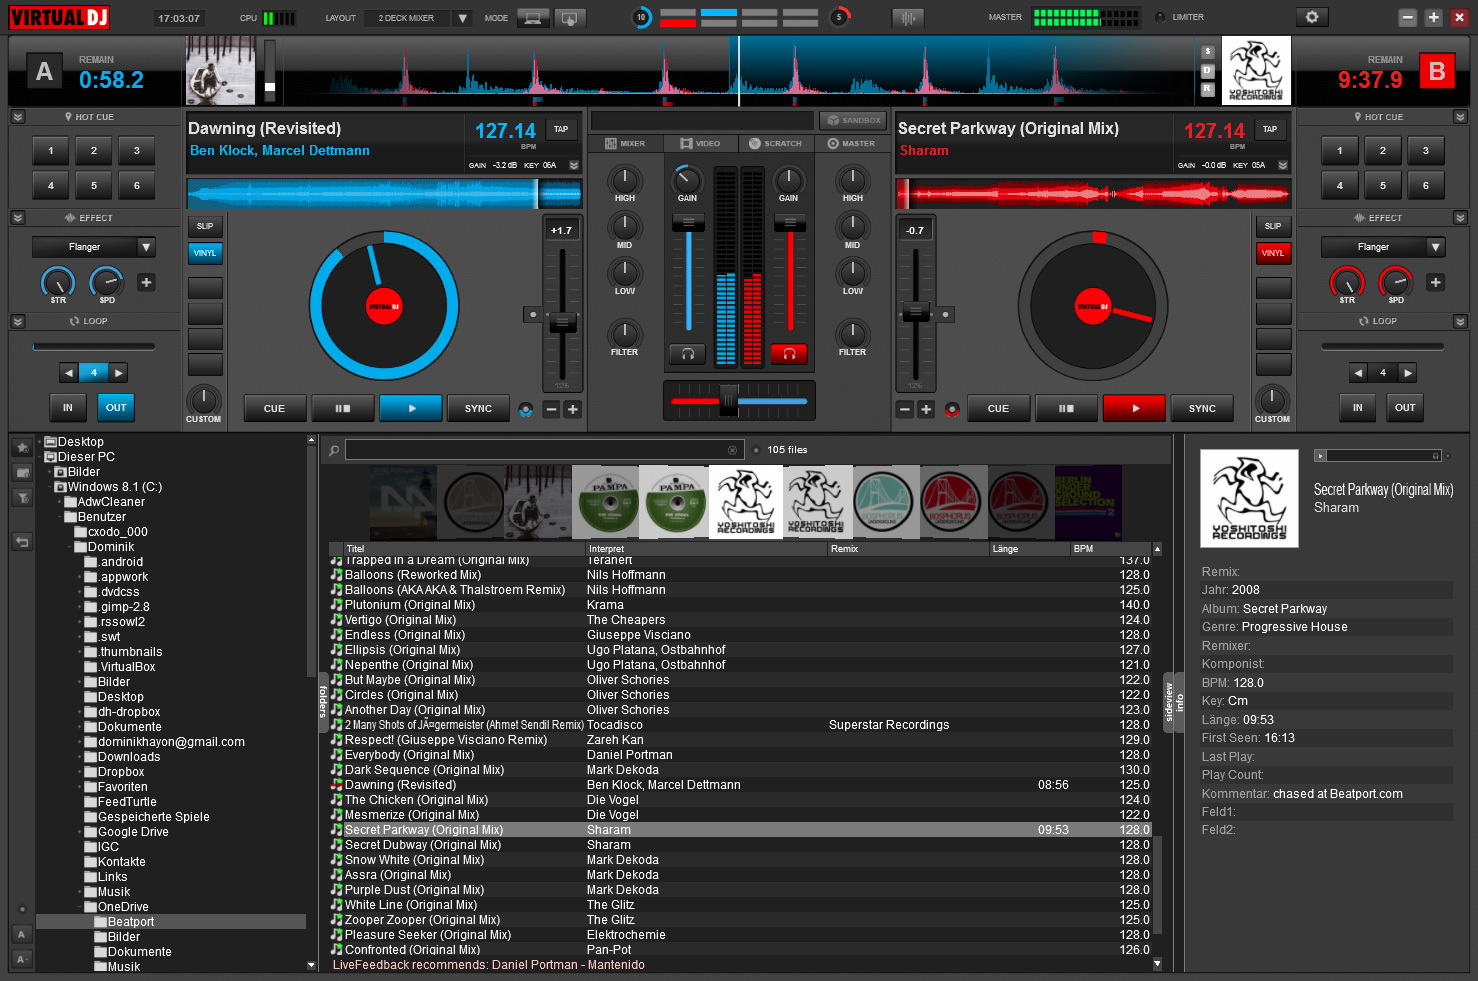 How to download virtual dj software for pc windows 10